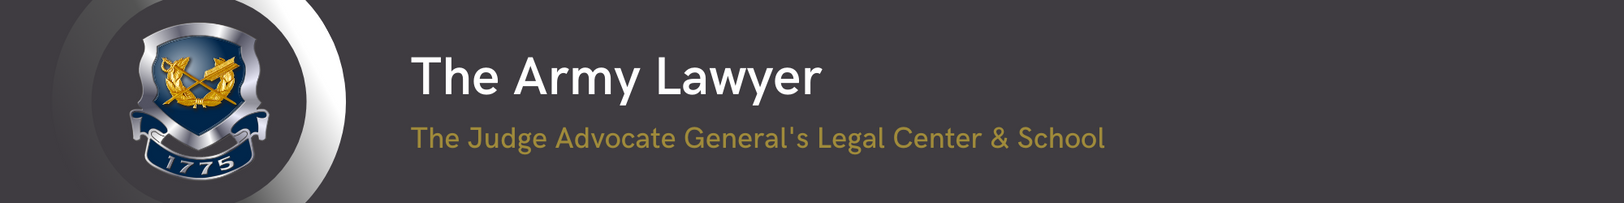 The Army Lawyer Banner